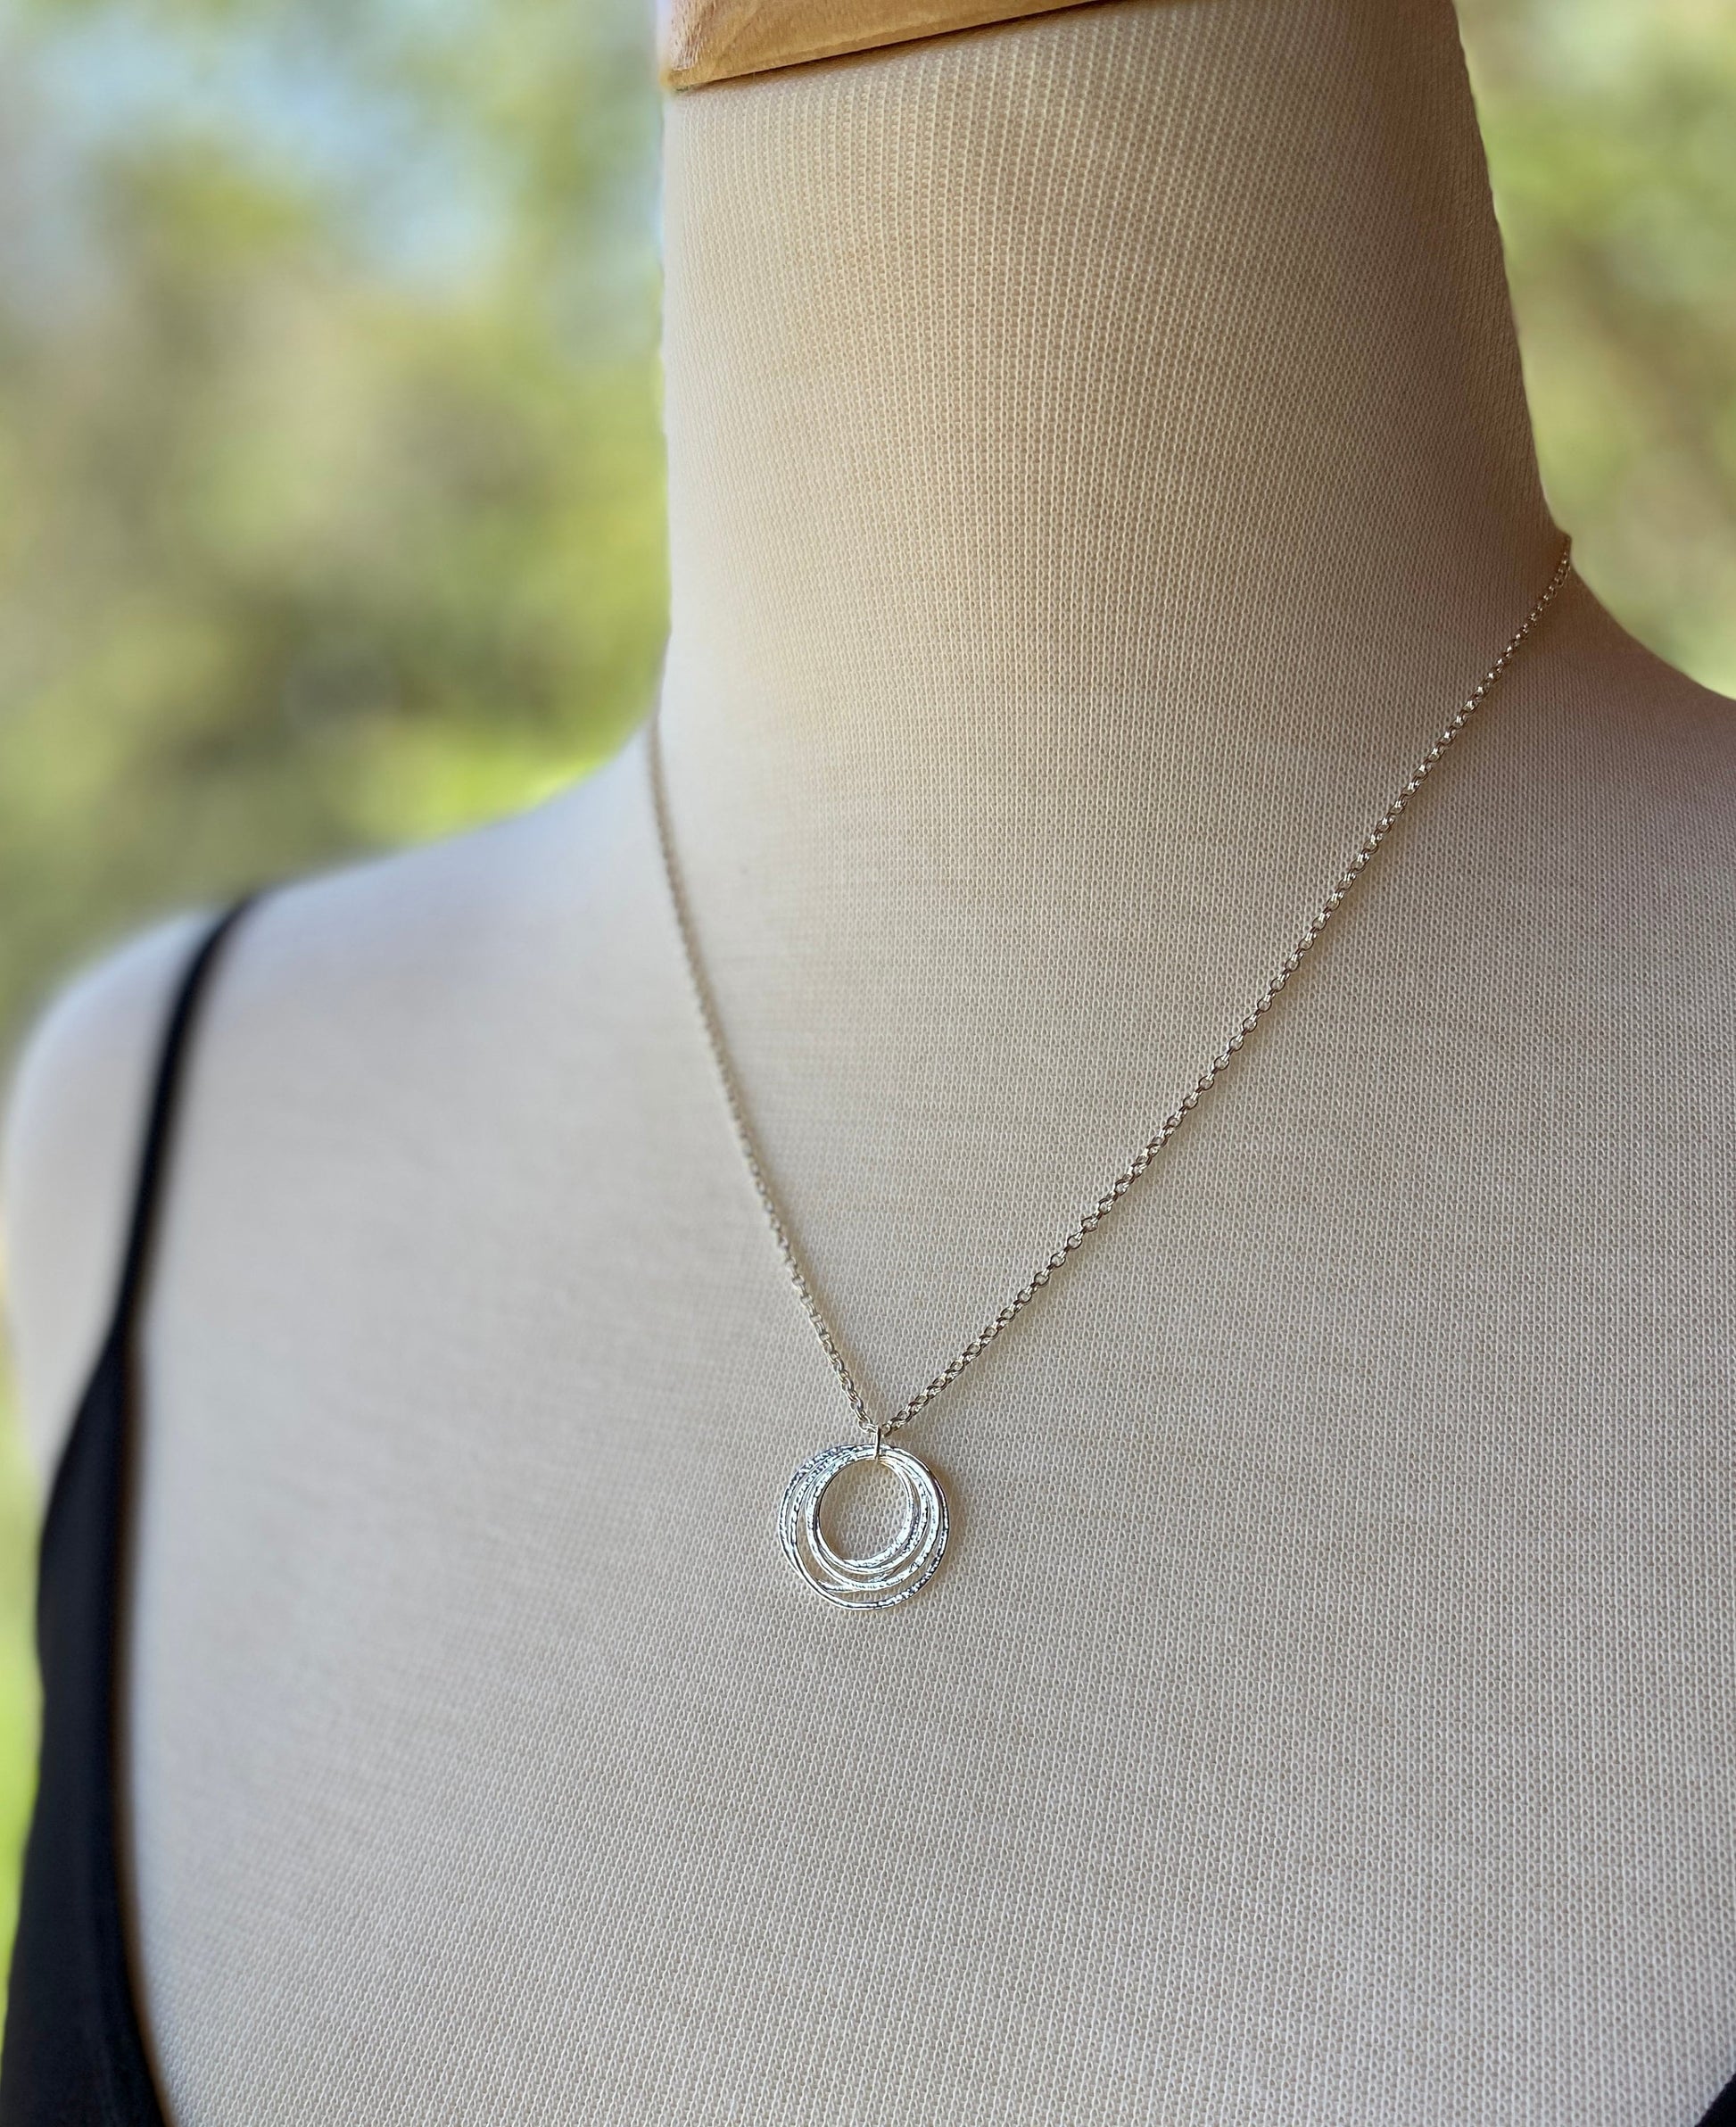 Five Circle 50th Minimalist Milestone Birthday Necklace, Sterling Silver 5 Rings for 5 Decades Handcrafted Perfectly Imperfect Pendant